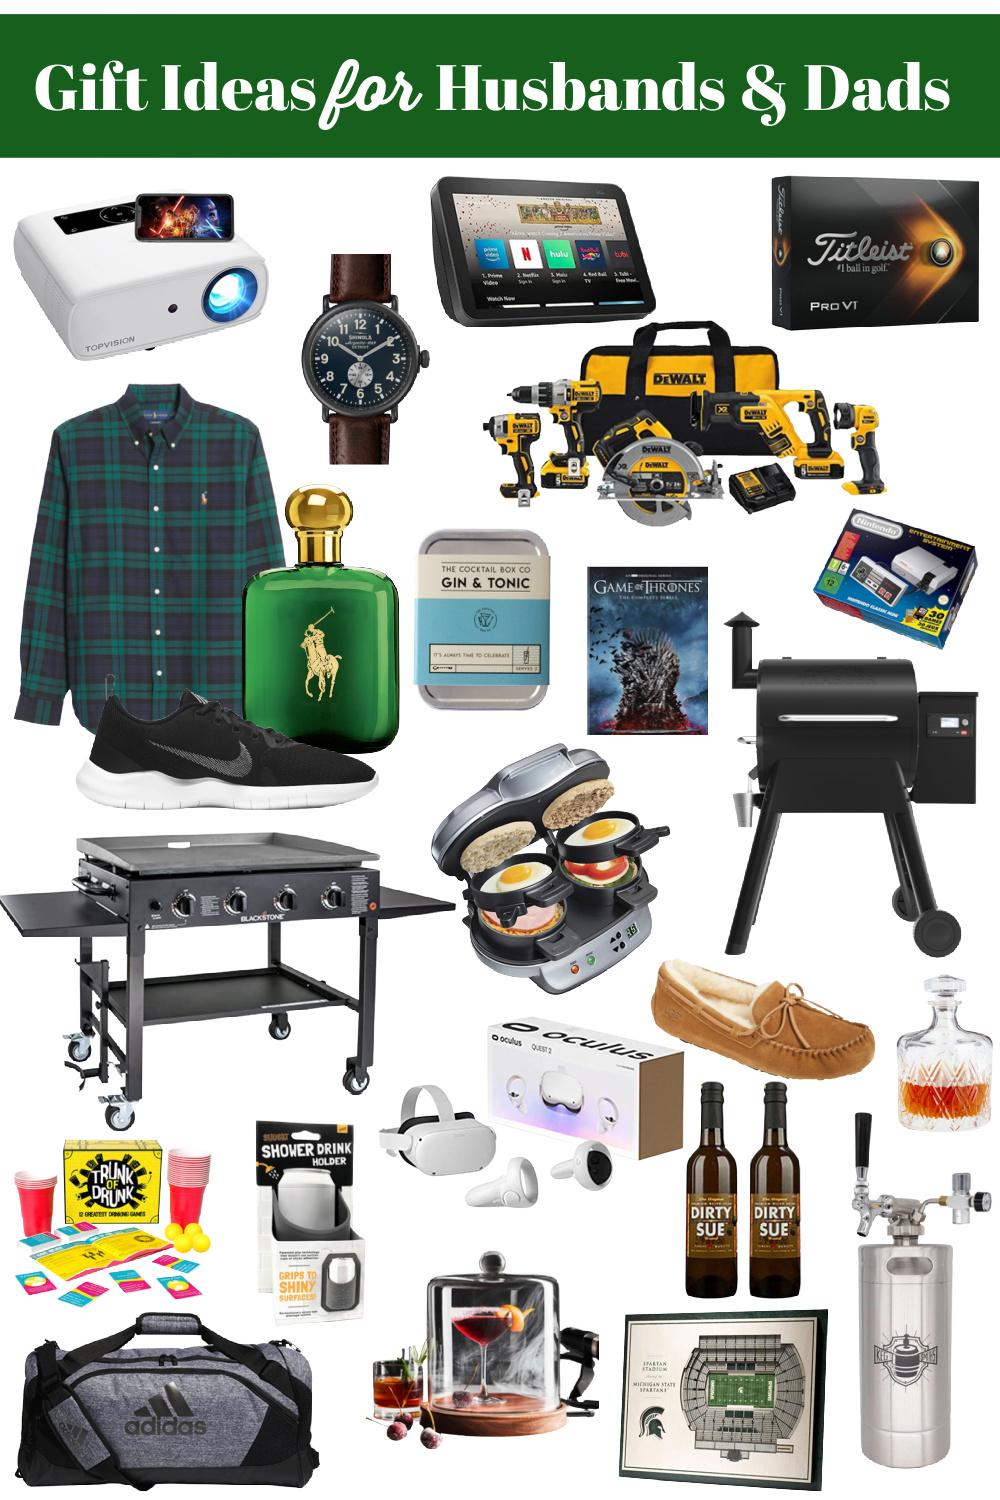 Gift Ideas for Husbands and Dads